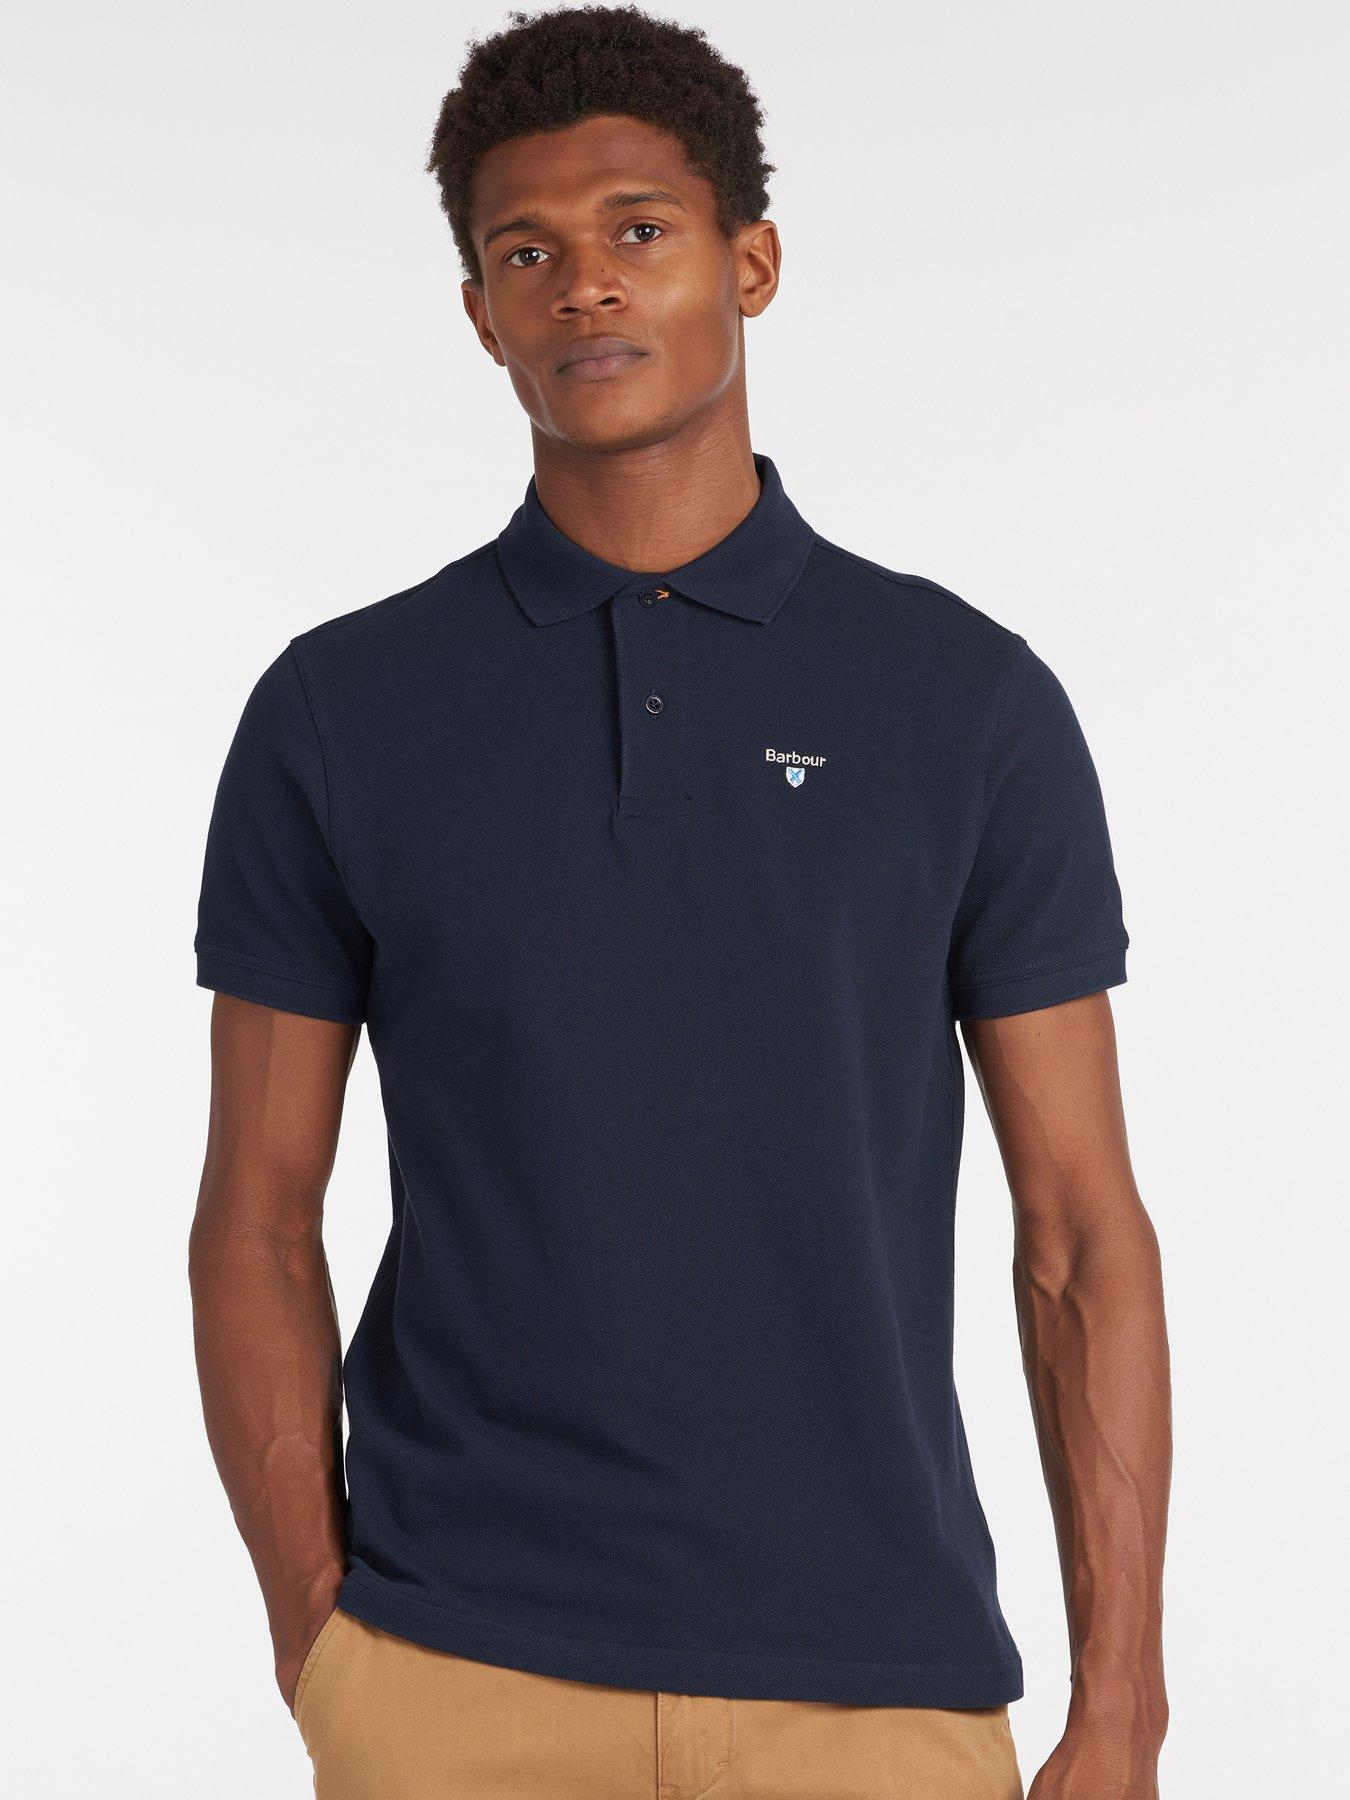 navy barbour polo shirt